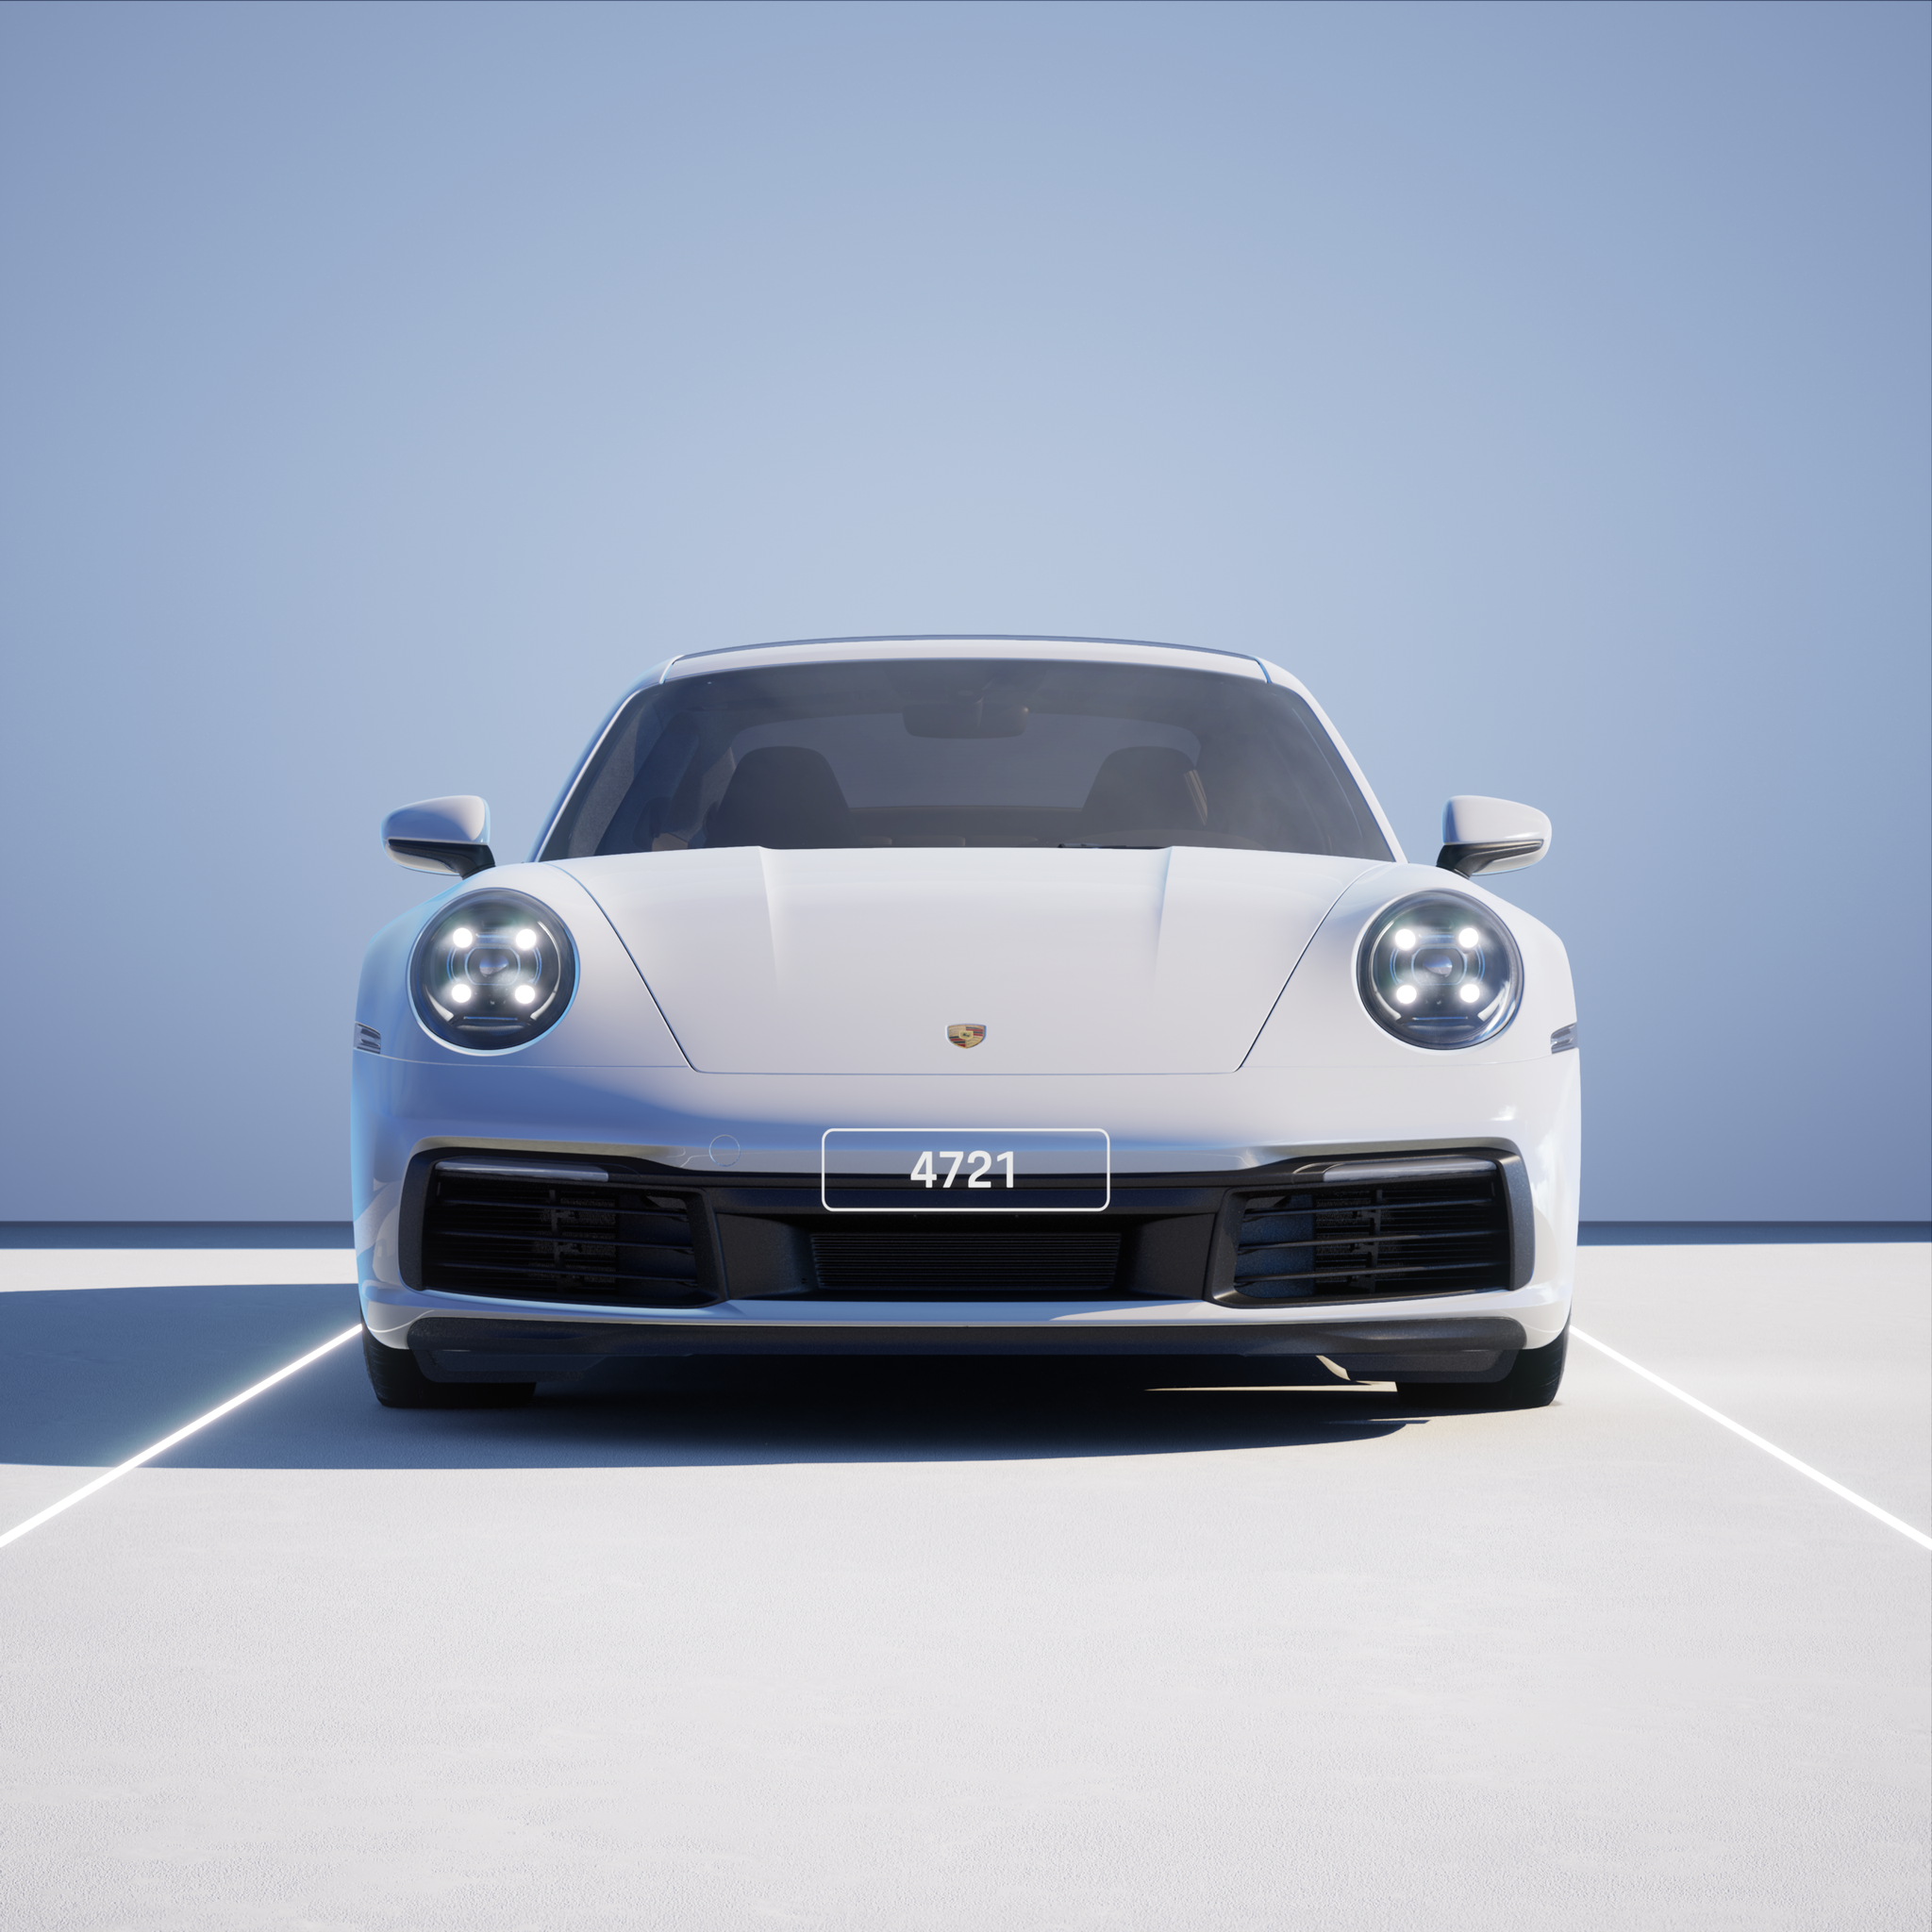 The PORSCHΞ 911 4721 image in phase